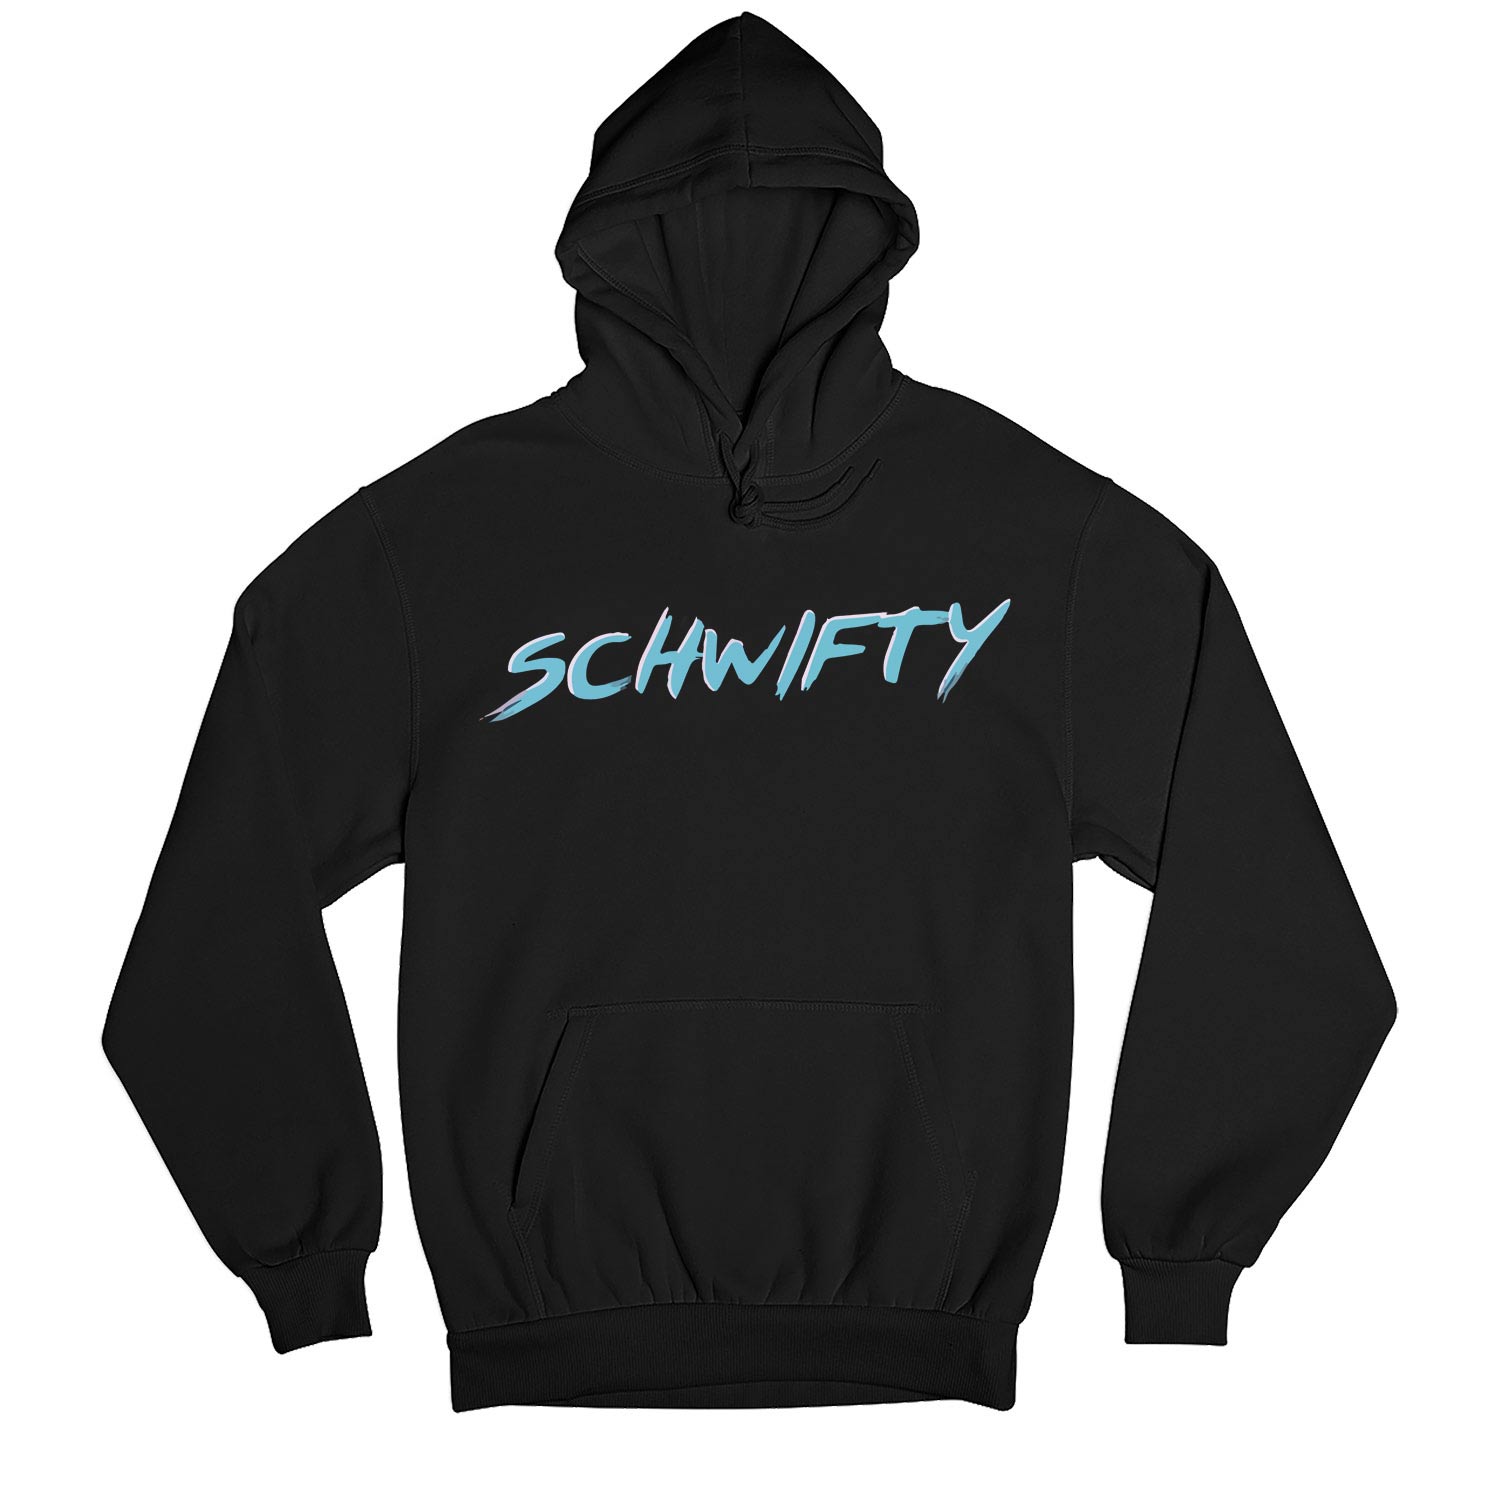 rick and morty schwifty hoodie hooded sweatshirt winterwear buy online usa united states of america the banyan tee tbt men women girls boys unisex black rick and morty online summer beth mr meeseeks jerry quote vector art clothing accessories merchandise